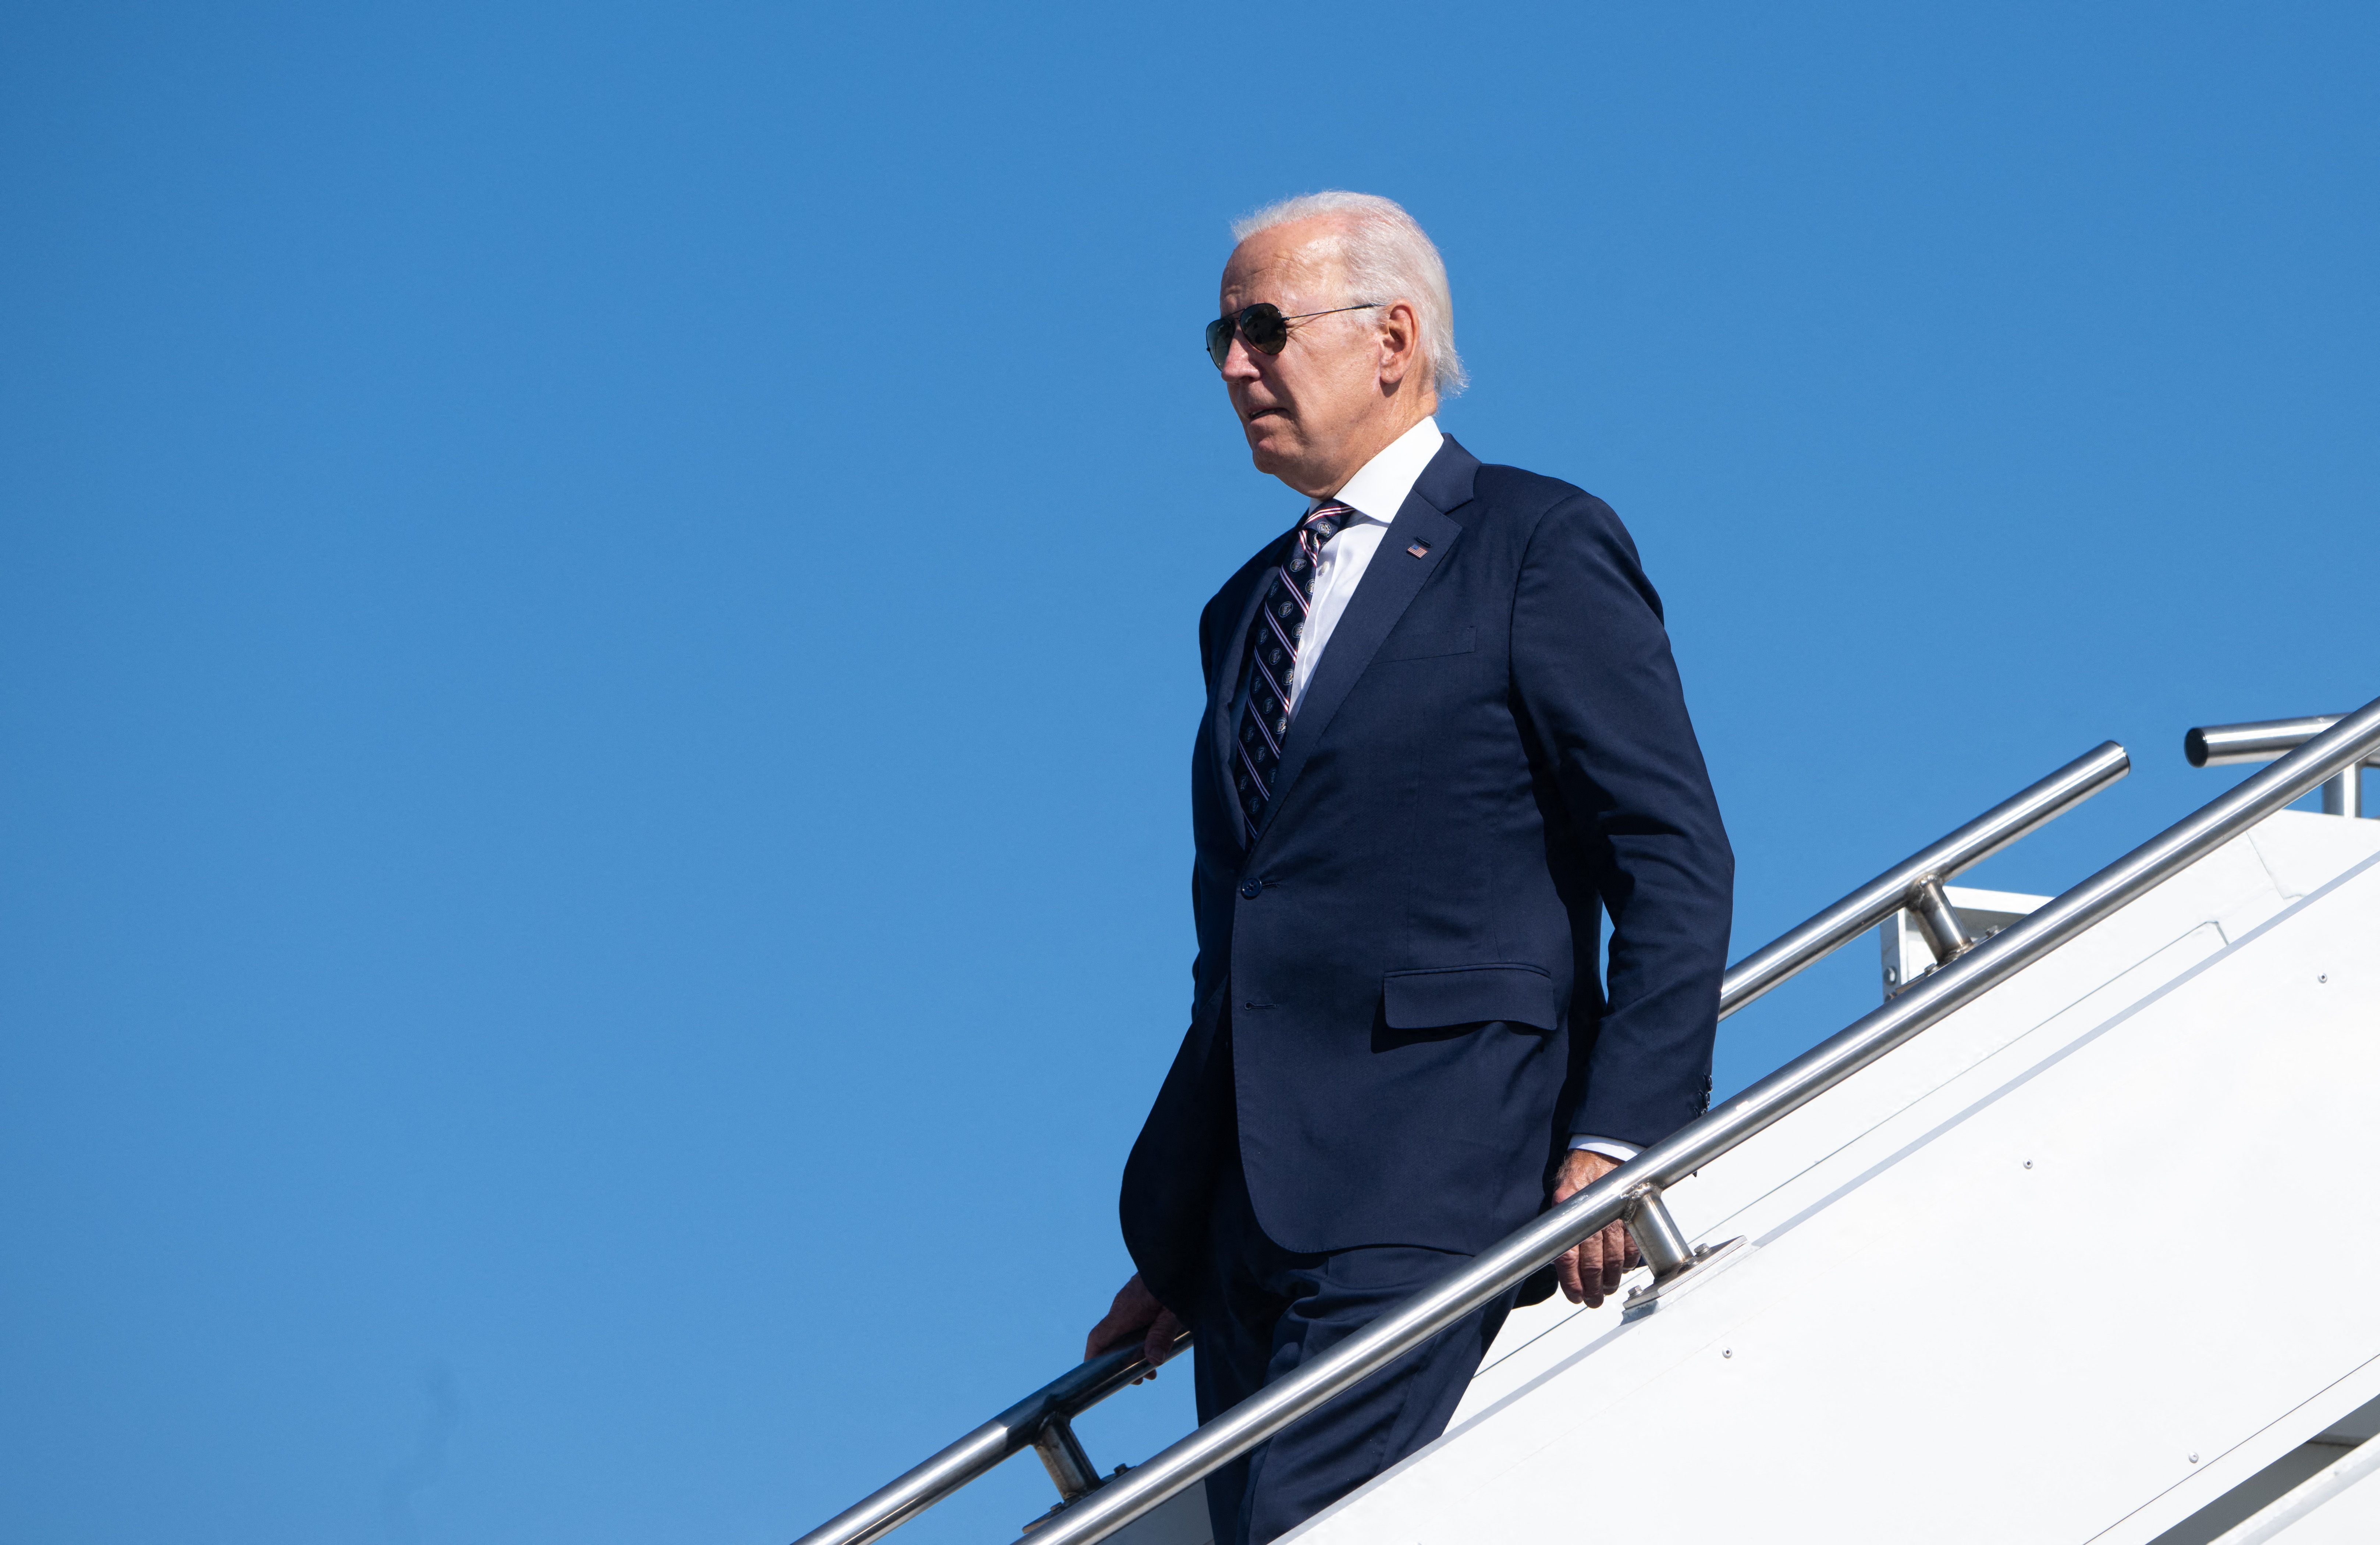 President Biden walks down the steps of Air Force One against a blue sky.